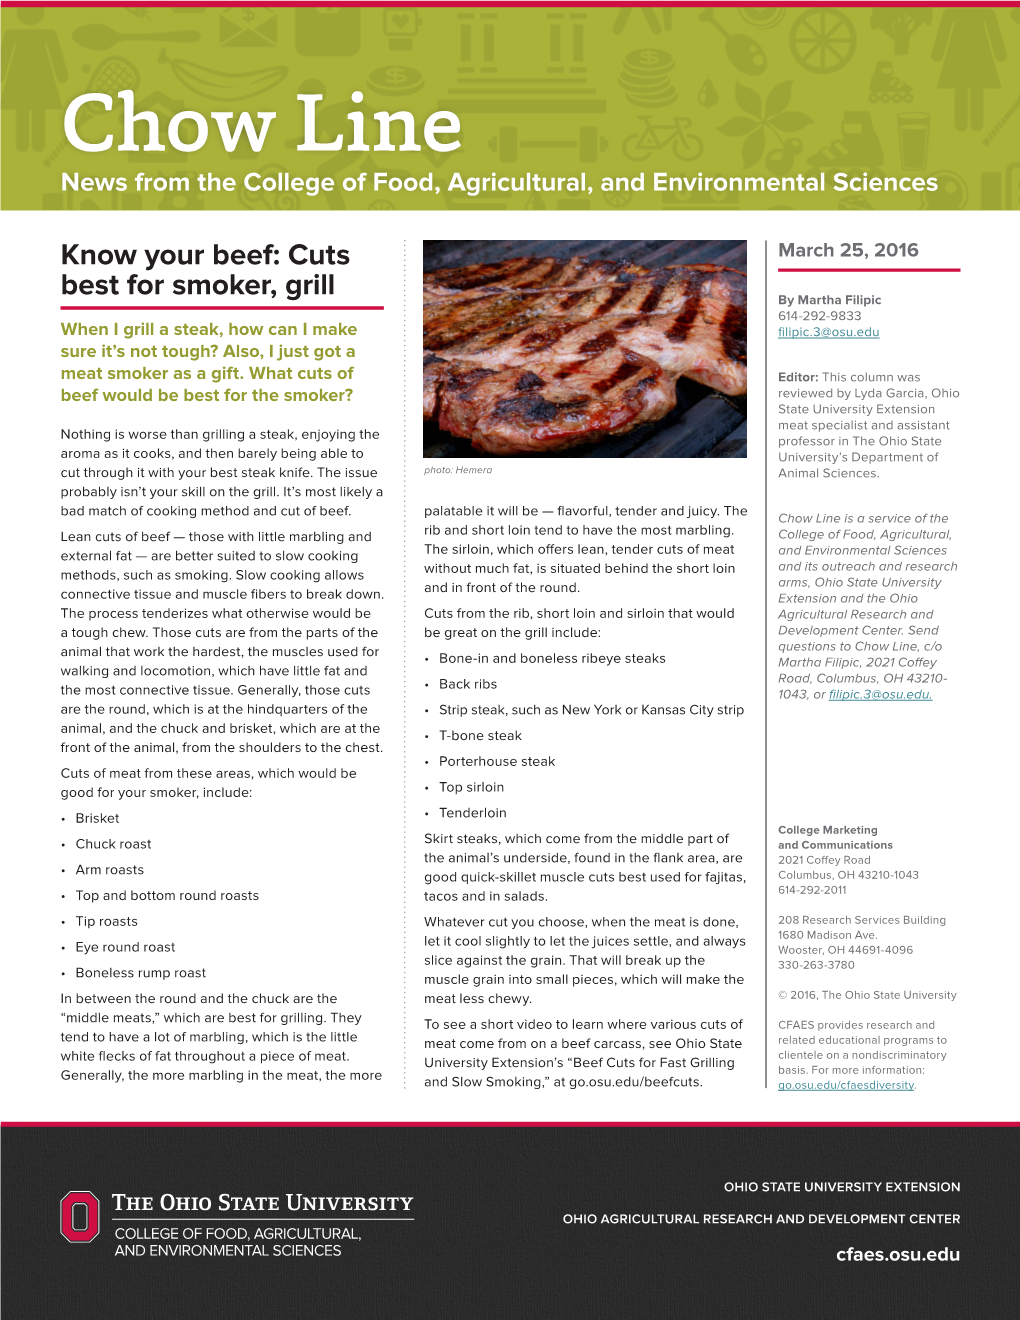 Know Your Beef: Cuts Best for Smoker, Grill